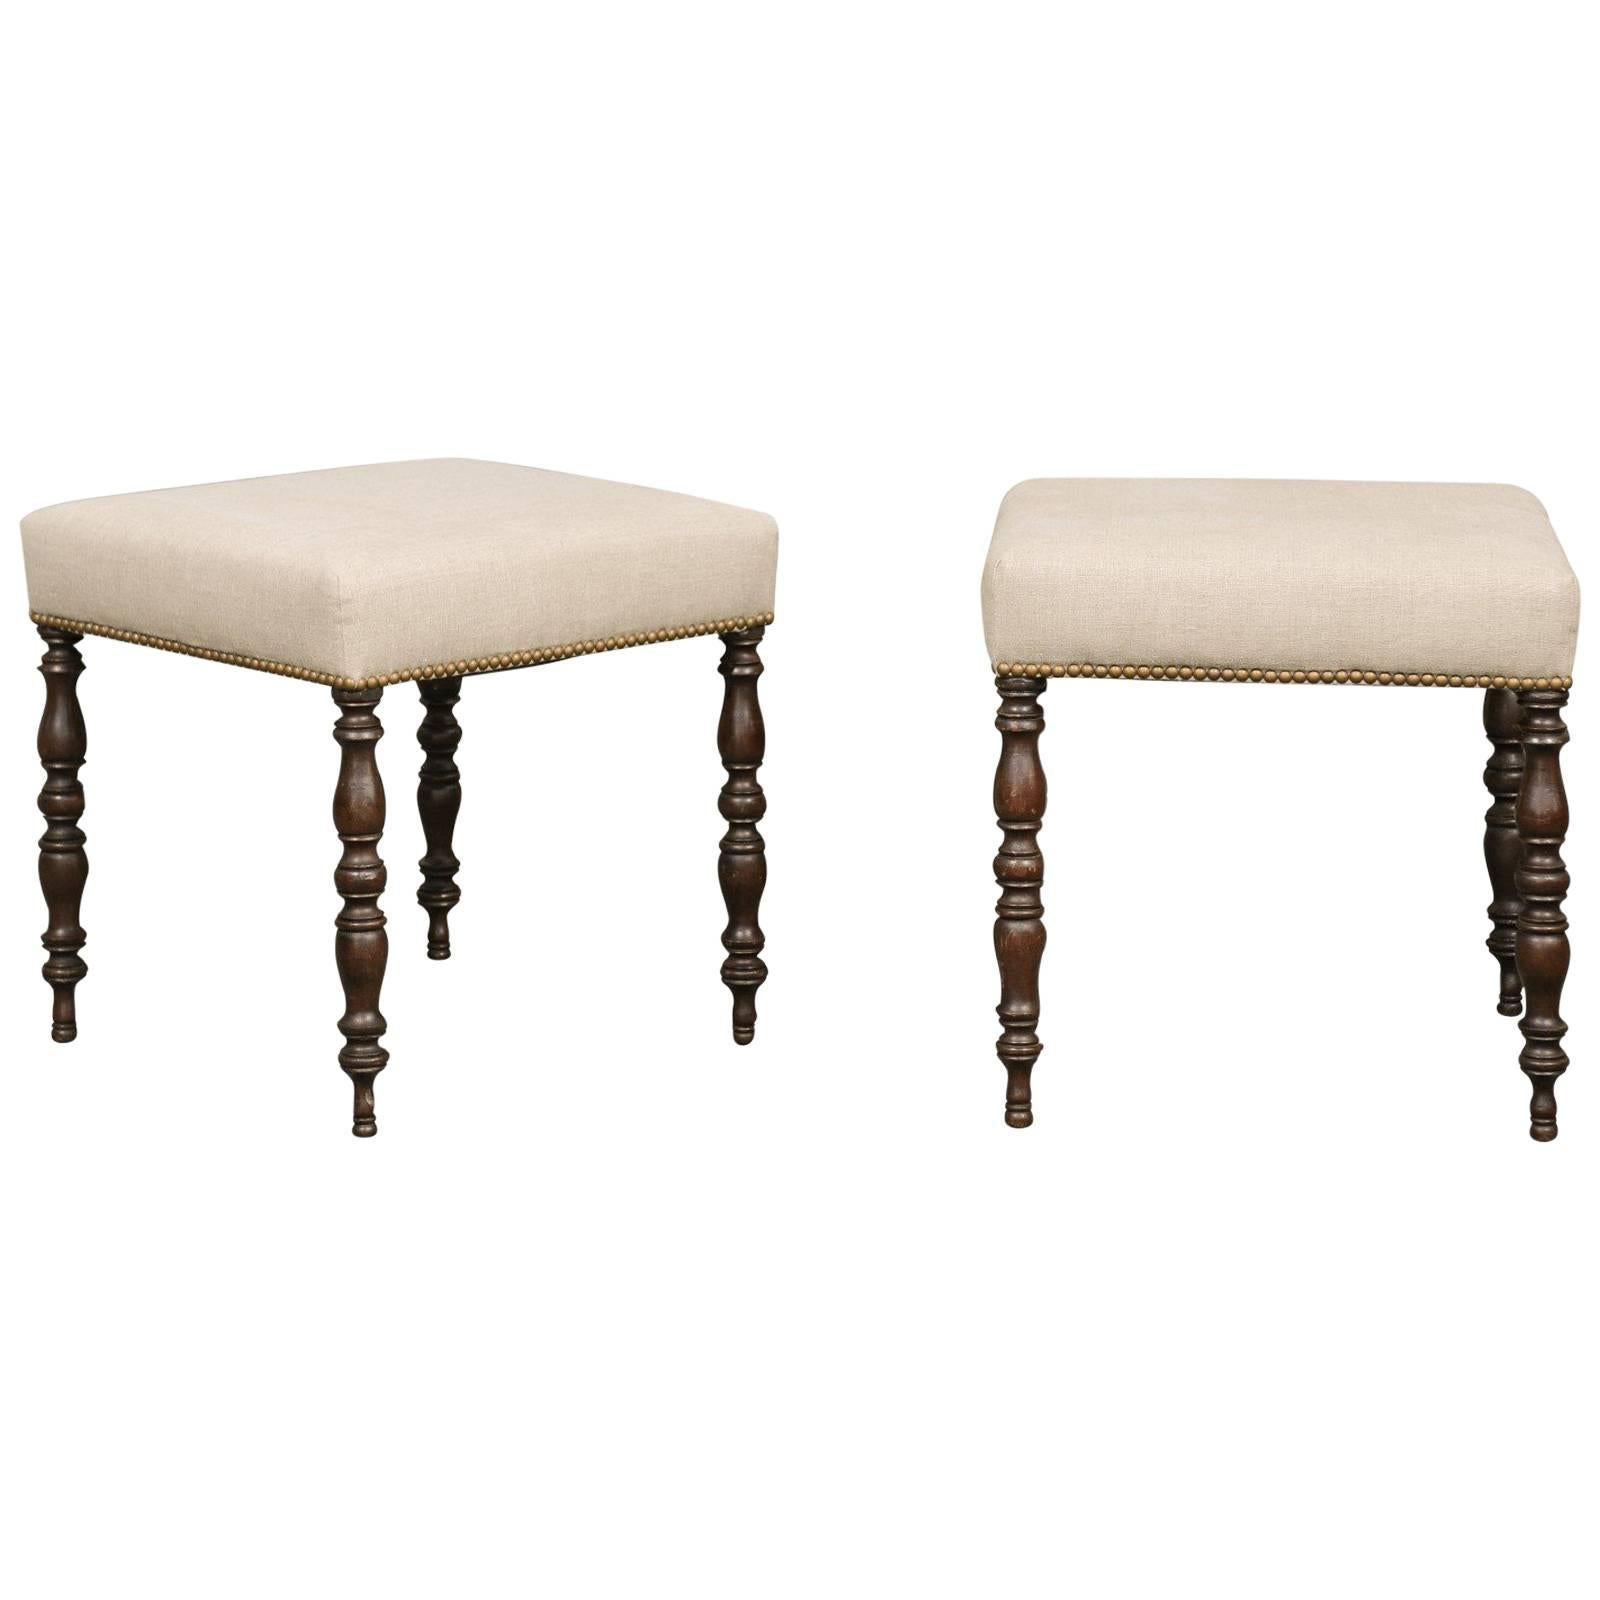 Pair of English, 1880s Walnut Stools with Turned Legs and Linen Upholstery